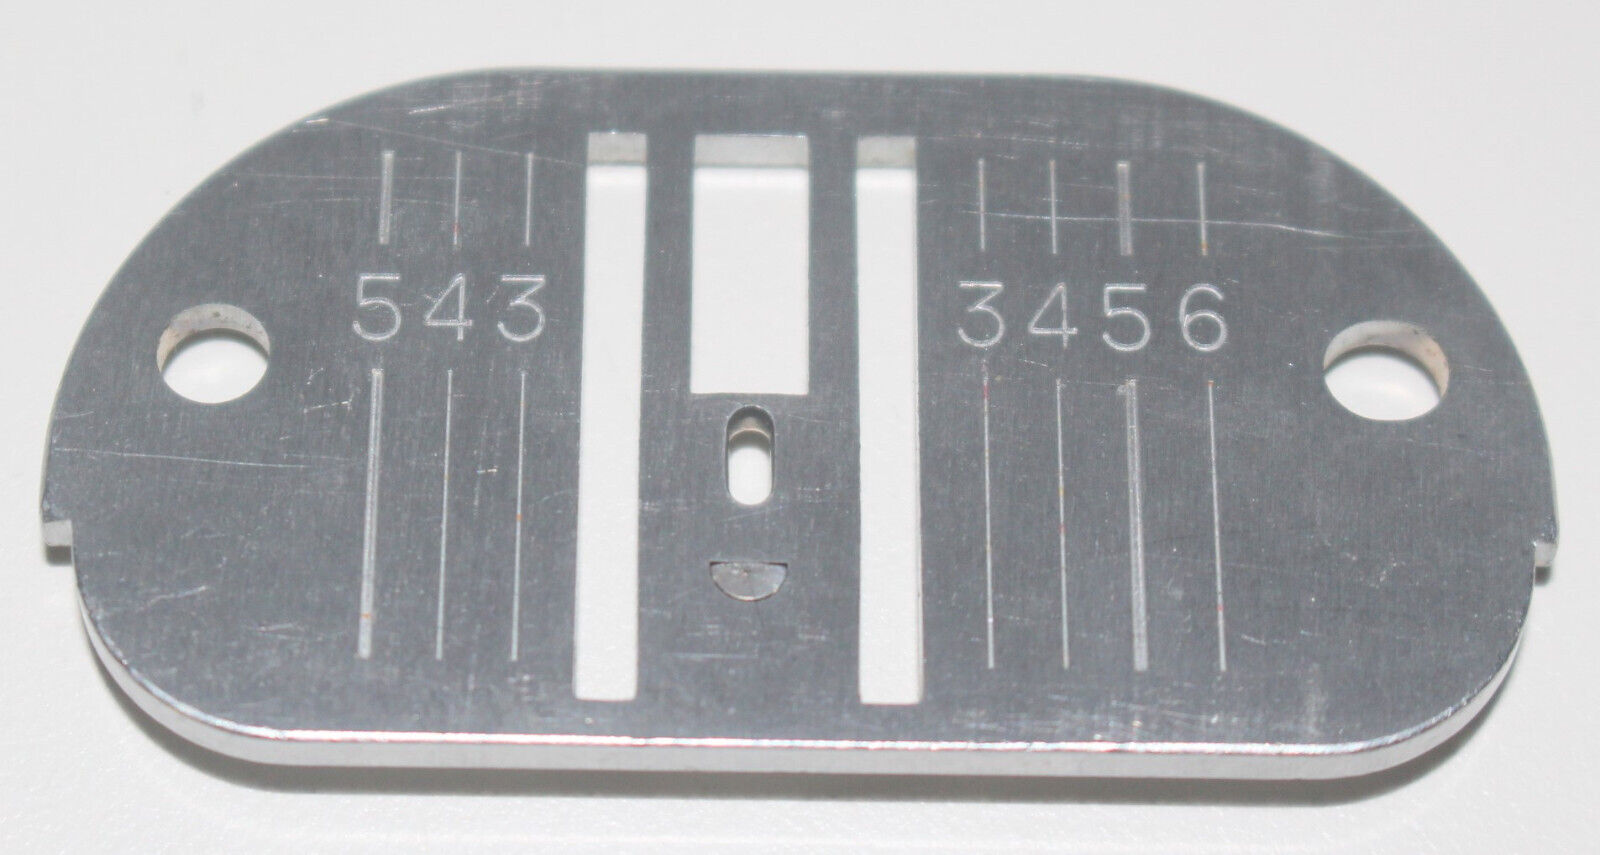 Singer 171467 Chain Stitch Needle Plate Touch & Sew 750 Series Sewing Machines